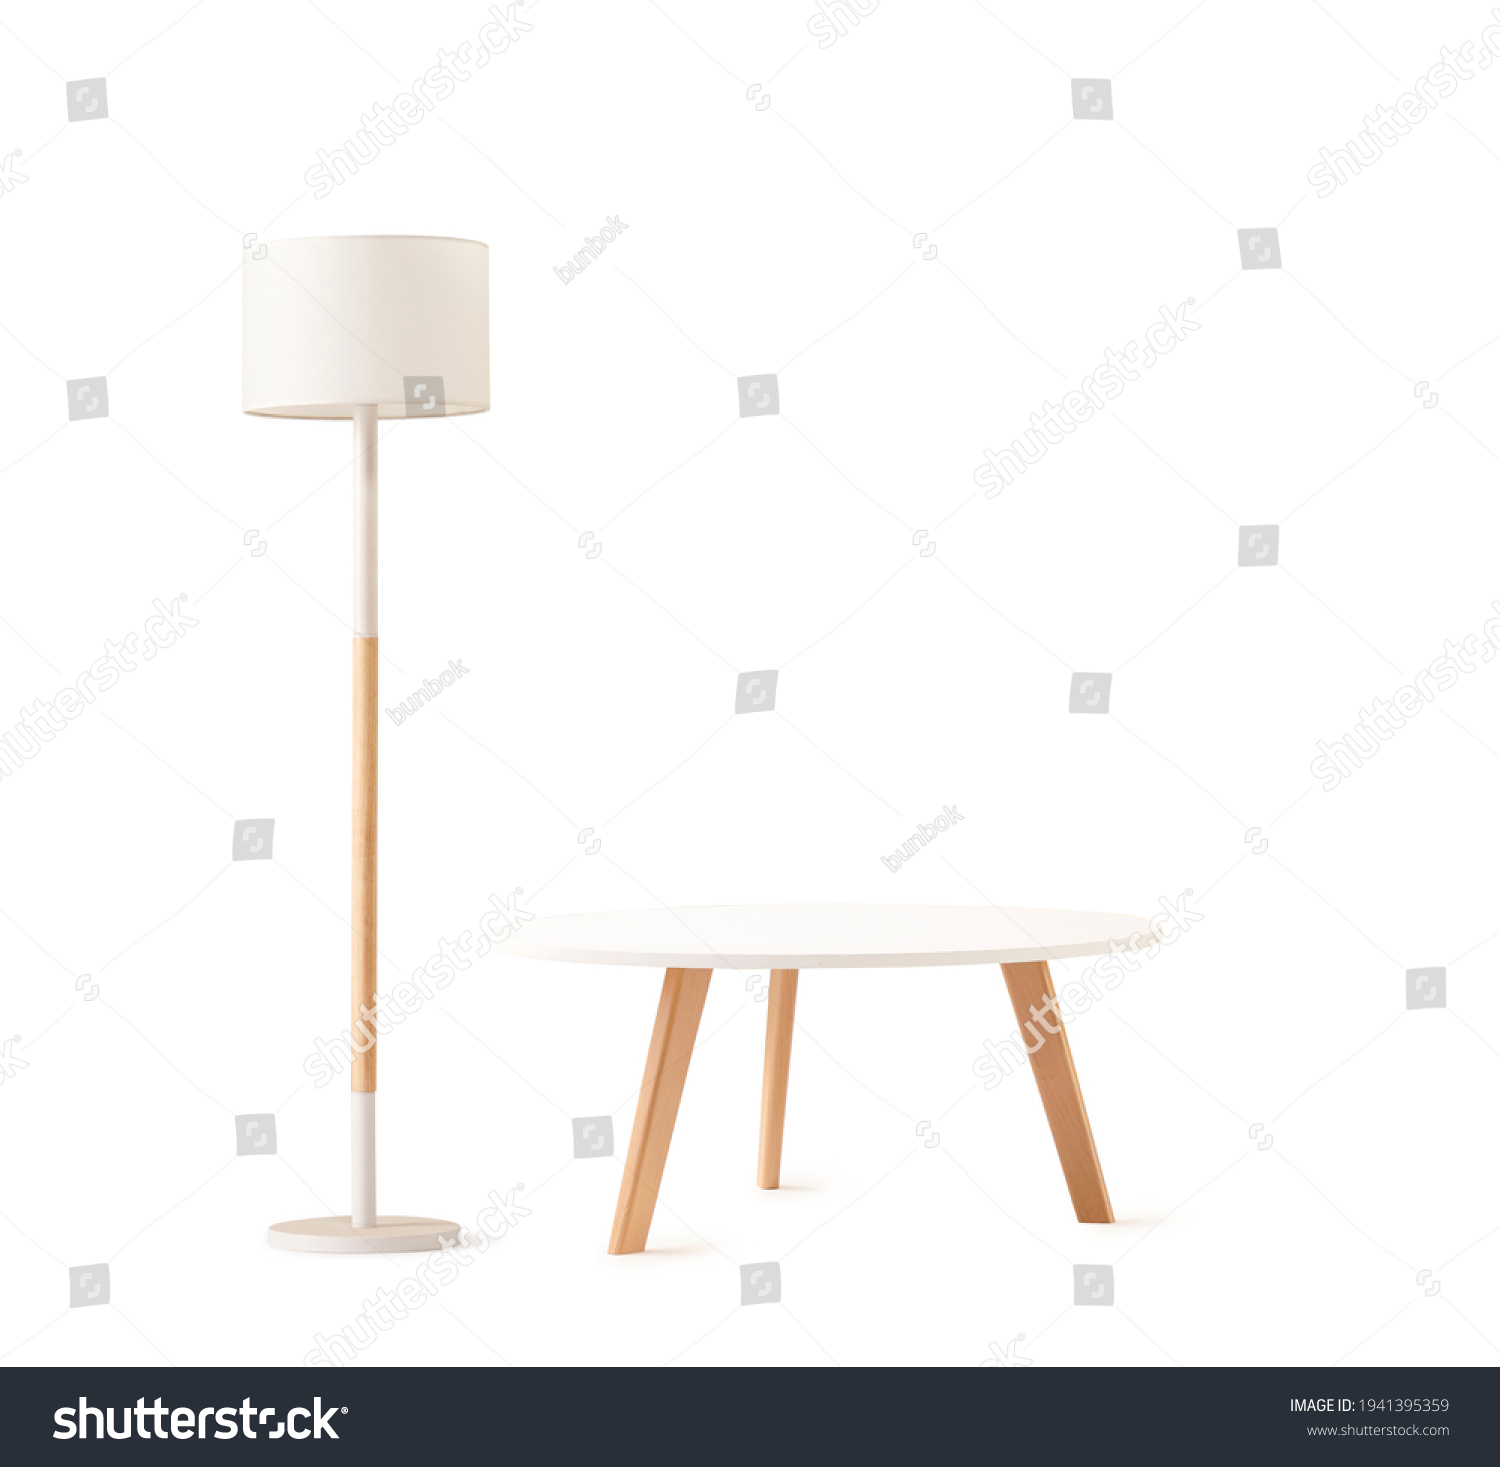 Coffee table and floor lamp isolated on white background #1941395359